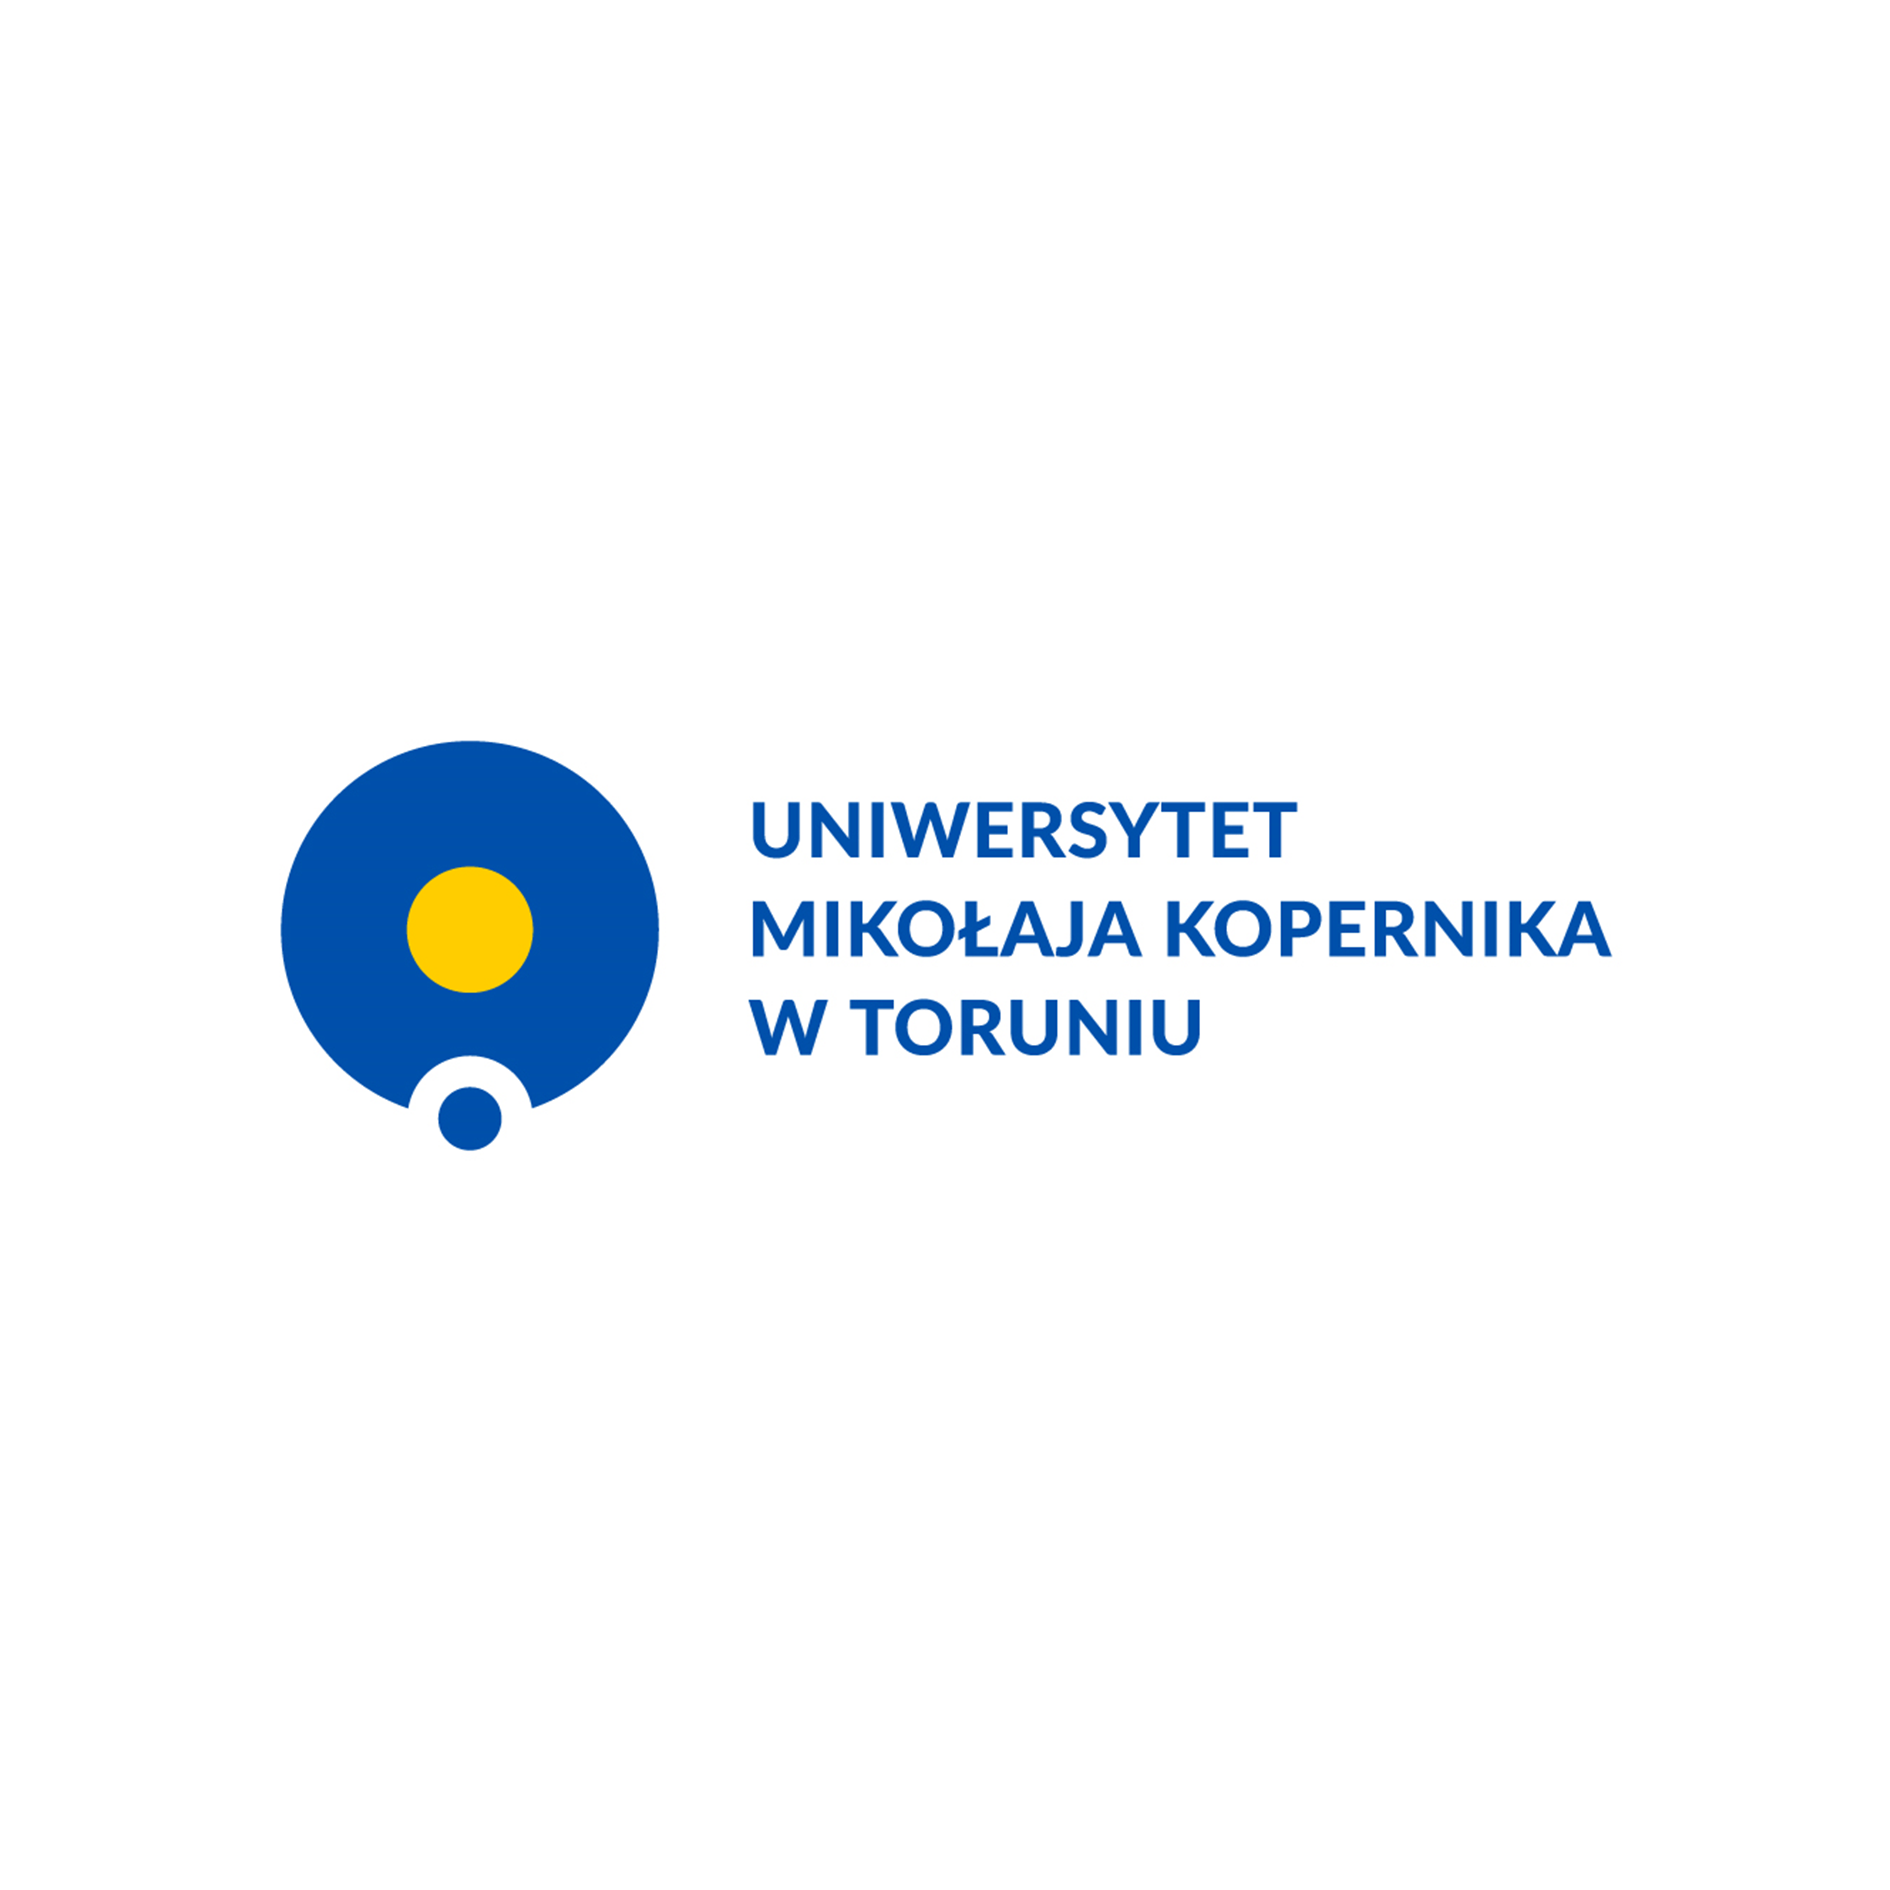 The Institute of Physics at Nicolaus Copernicus University specialises in photonics, quantum physics, atomic and molecular physics and their applications.